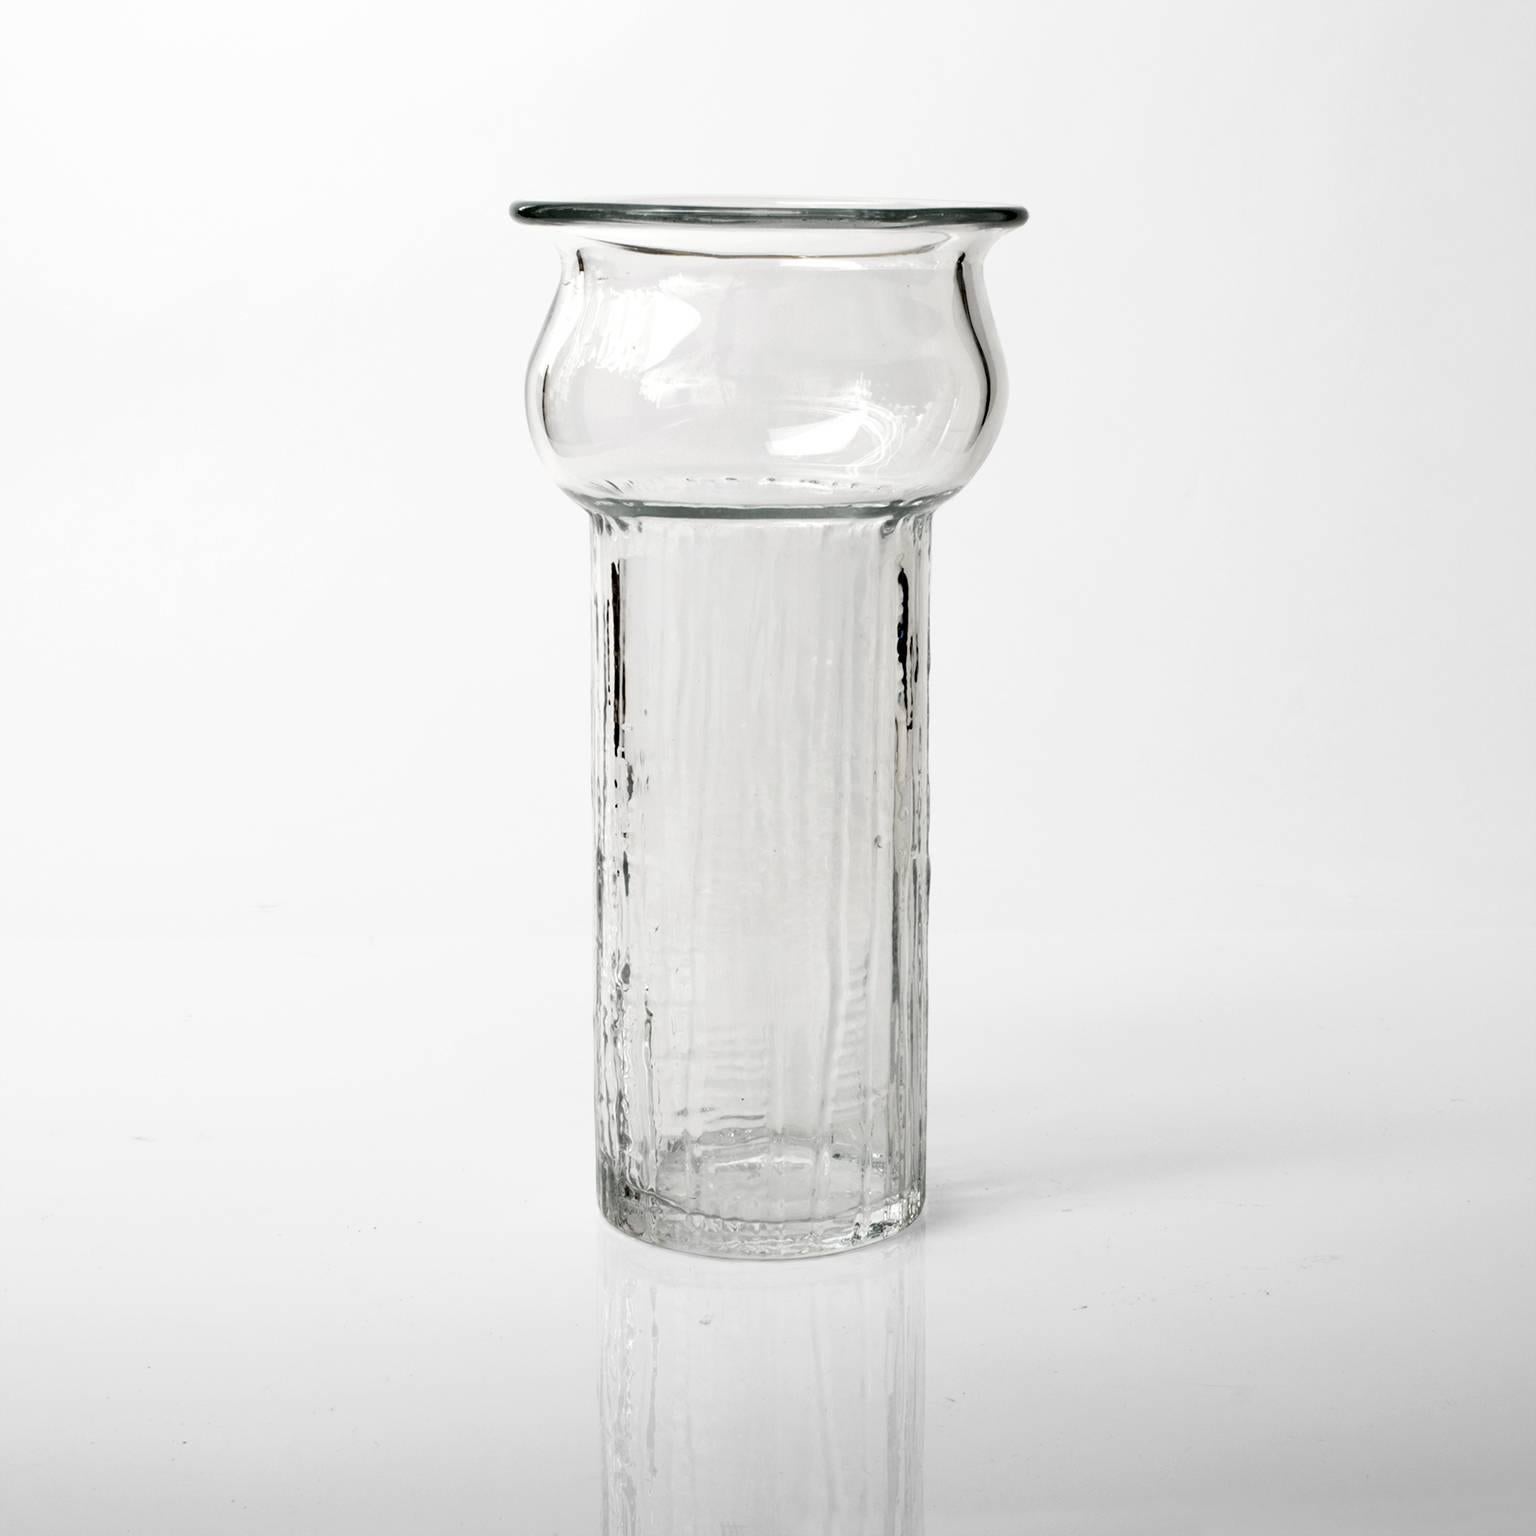 Scandinavian Modern Swedish Mid-Century tall clear glass vase with textured body made by Pukeberg, circa 1960s.

Measures: H 12.5